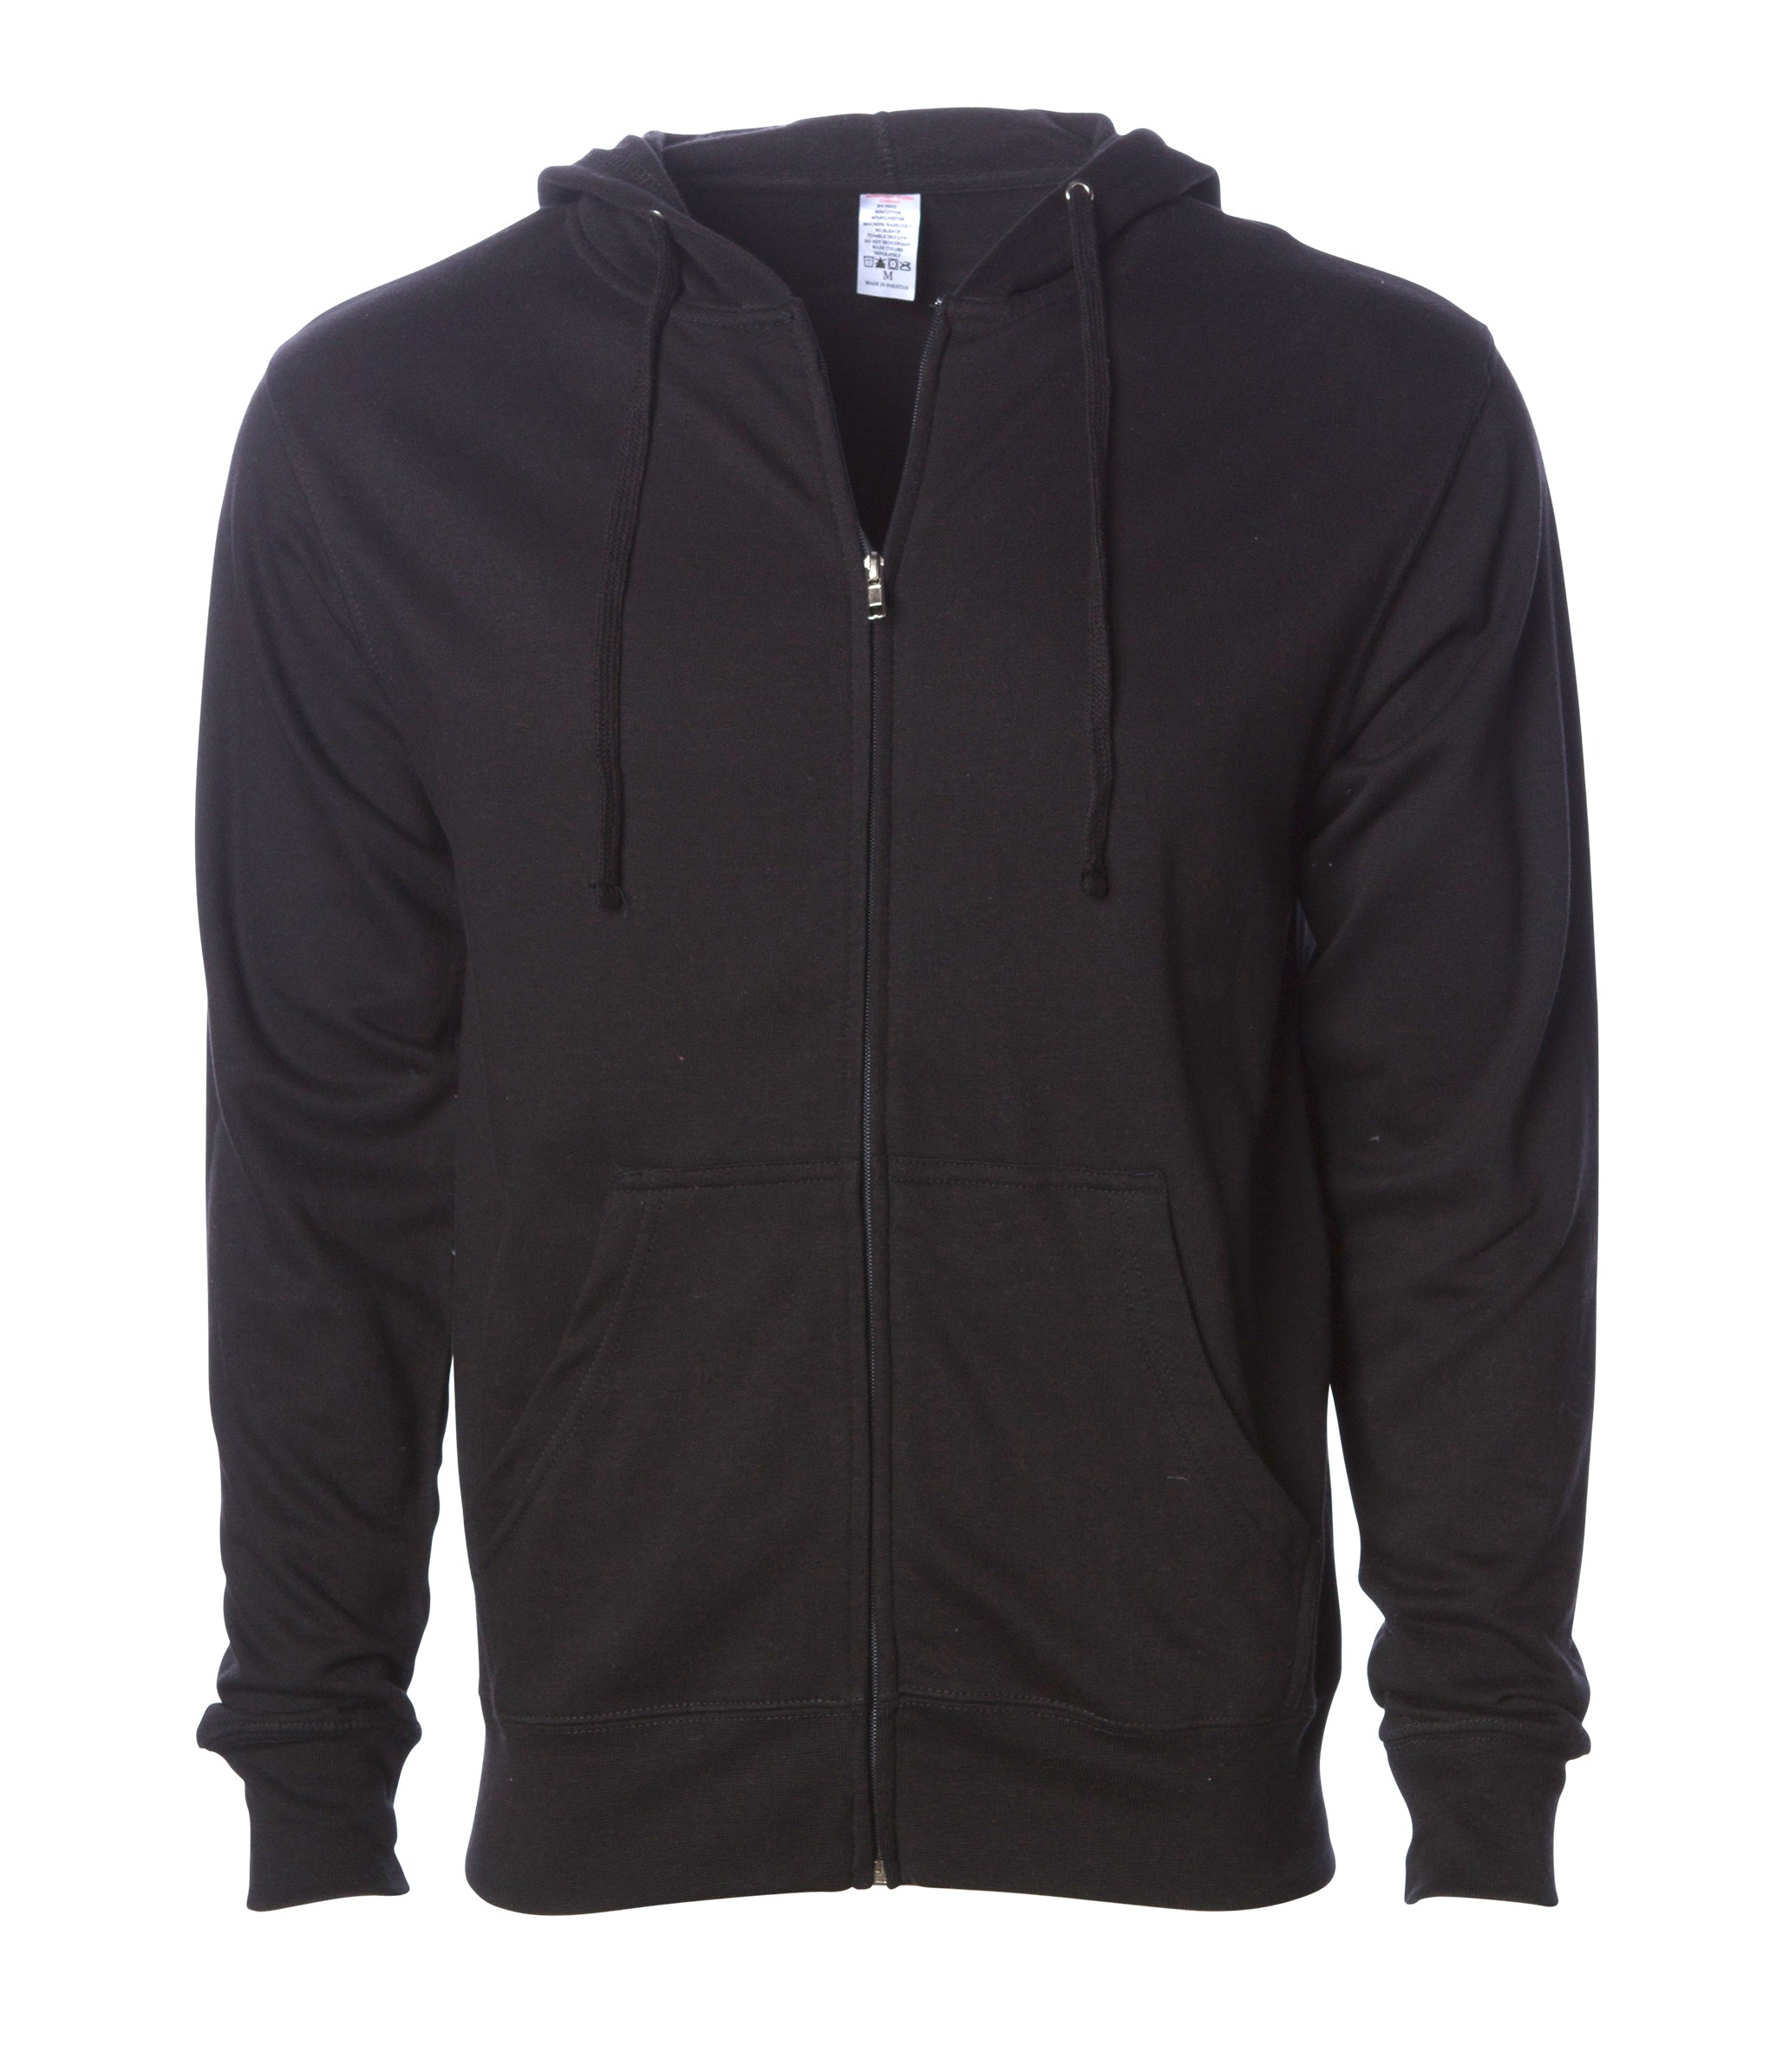 Independent Trading Co. SS4500Z Midweight Full-Zip Hooded Sweatshirt - Charcoal Heather - 2XL